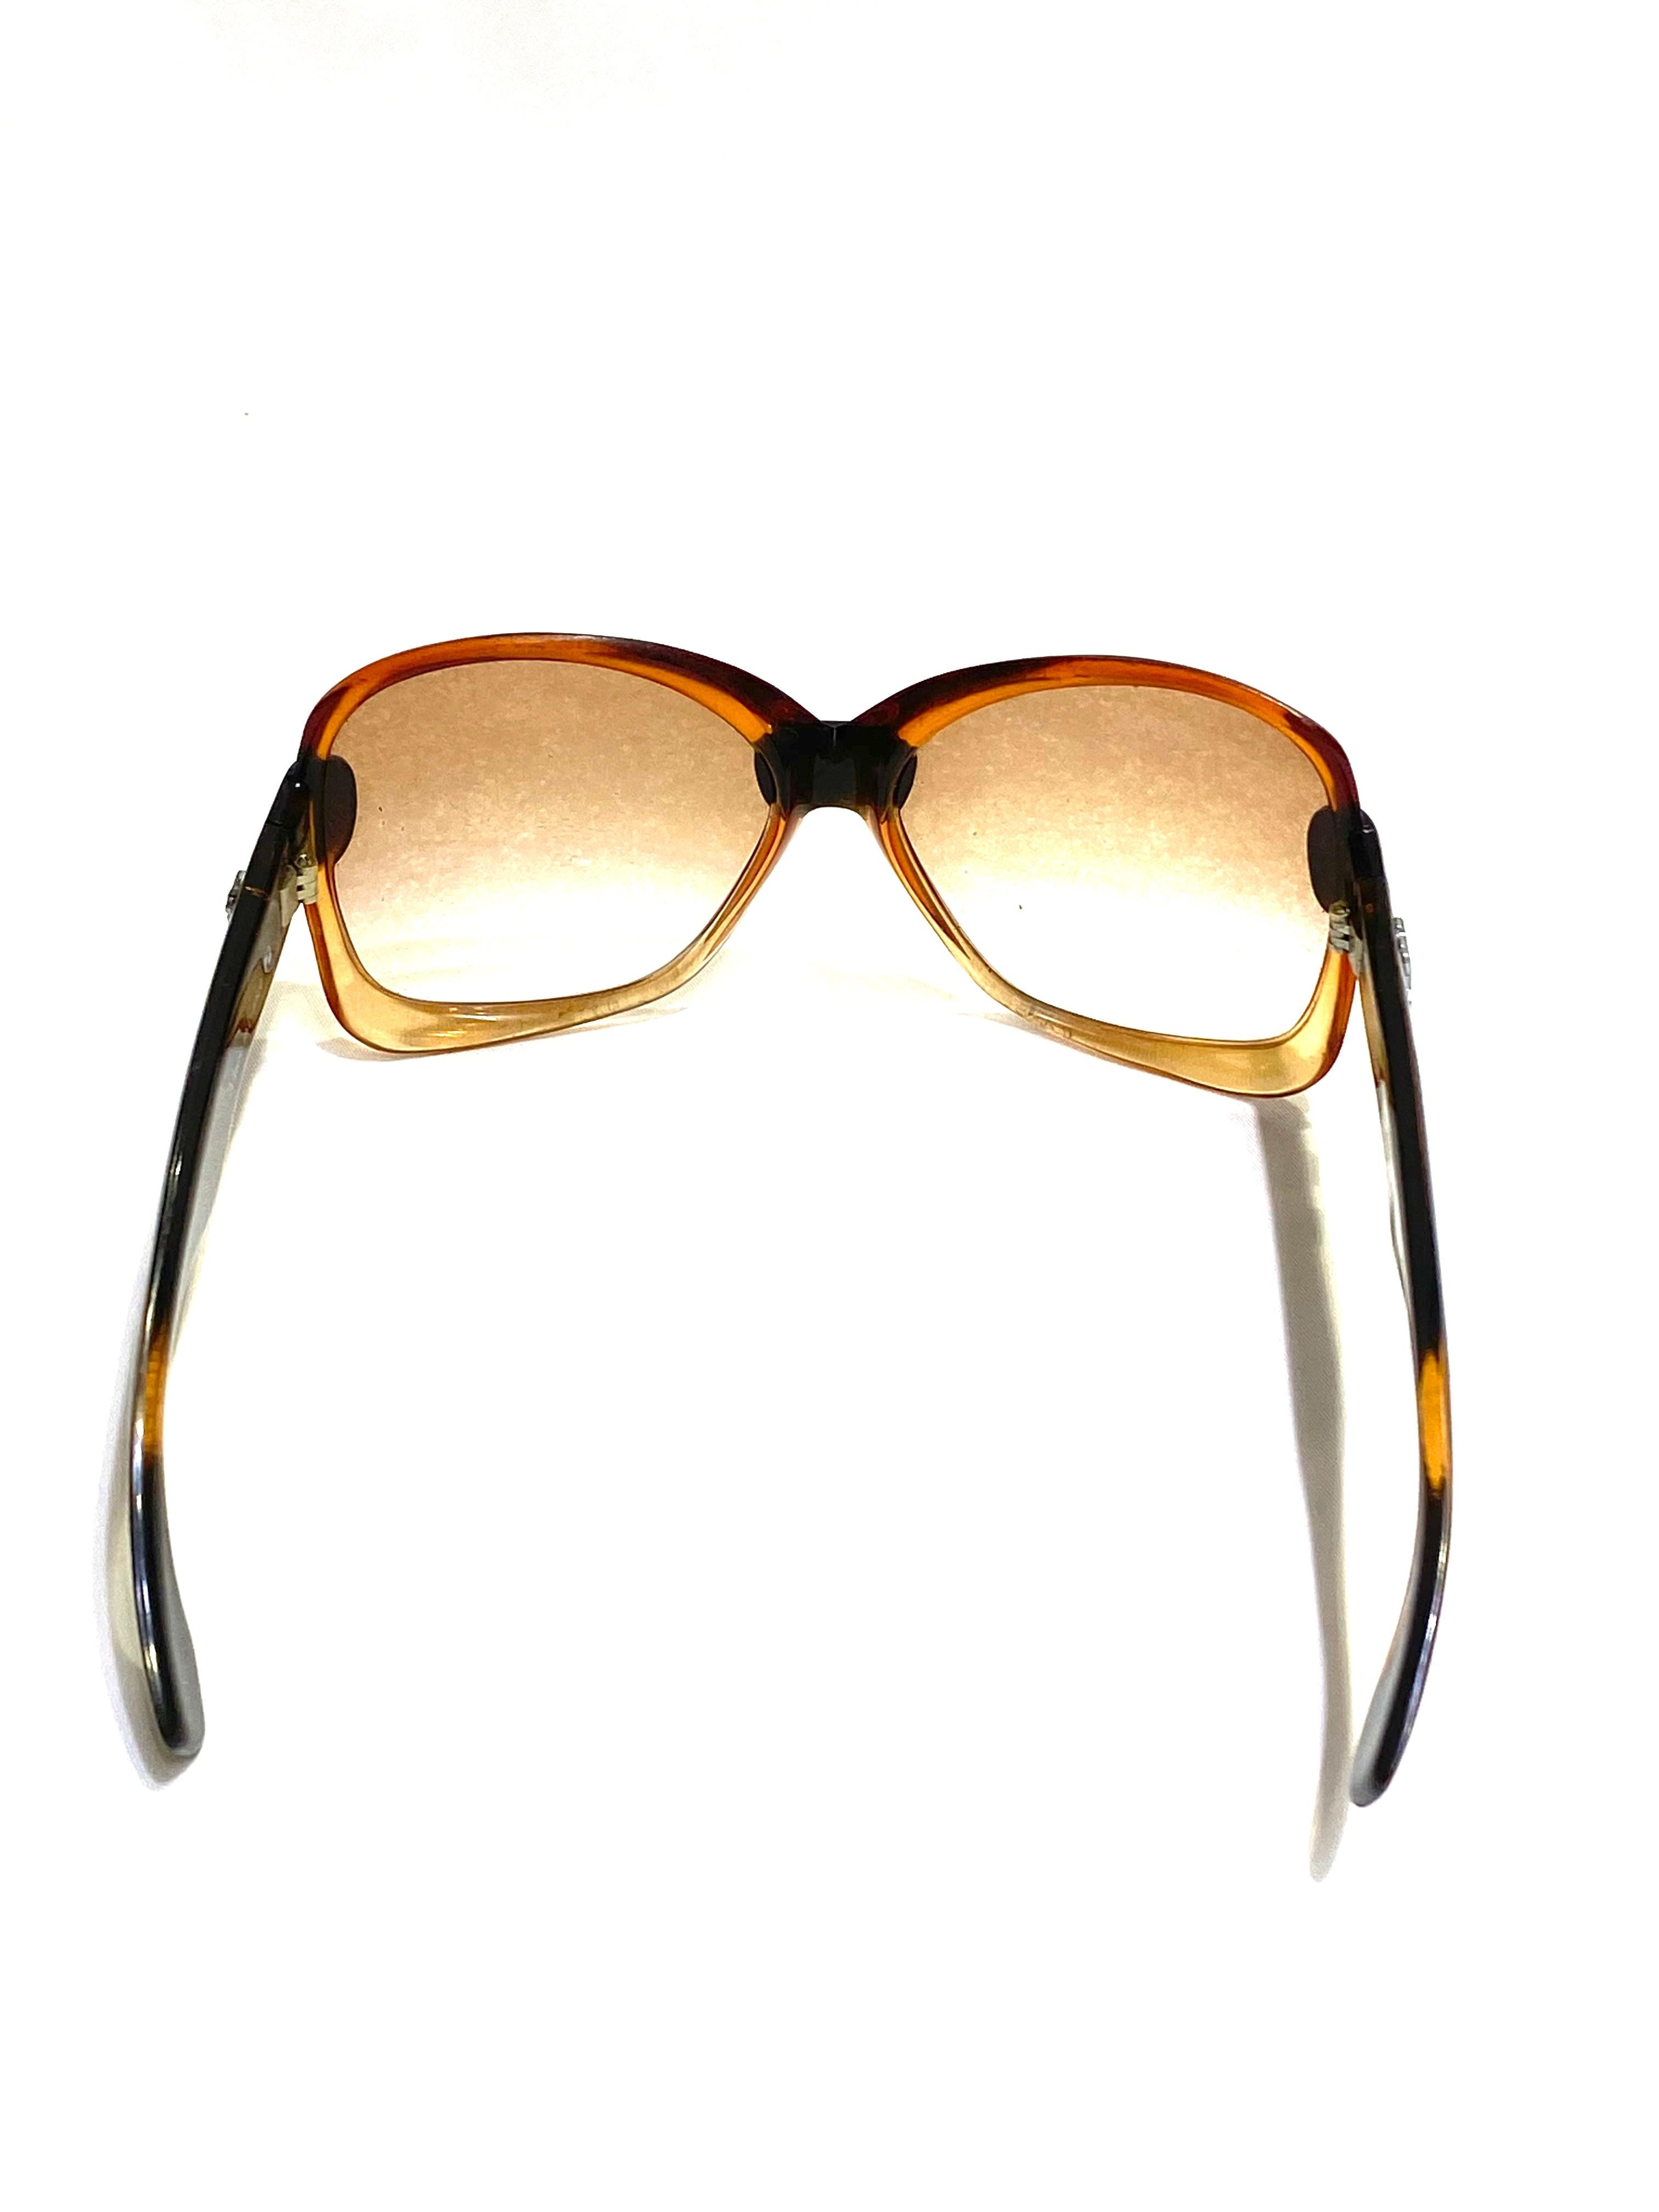 Vintage YSL Brown and Black Square Sunglasses In Excellent Condition For Sale In Beverly Hills, CA